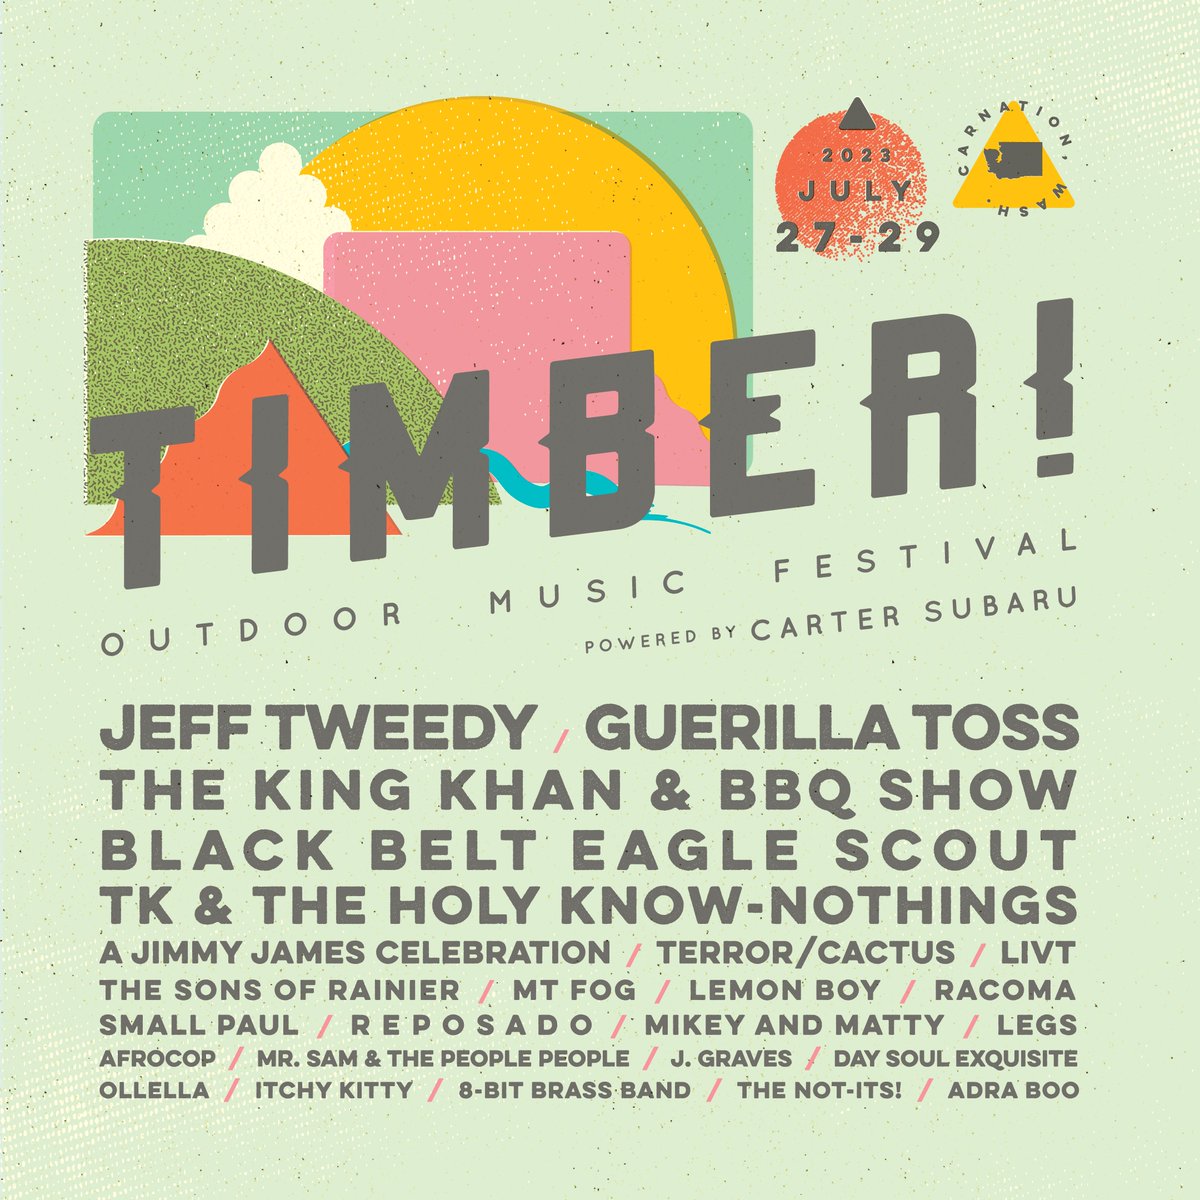 🏕️ @Timberfest lineup is out! Get your tickets now for a fest that’s as PNW as it gets with camping, biking, and swimming alongside live performances from greats like @JeffTweedy and @guerillatoss and local stars like @blackbelteagles and @lemonboyband. do206.com/events/2023/7/…